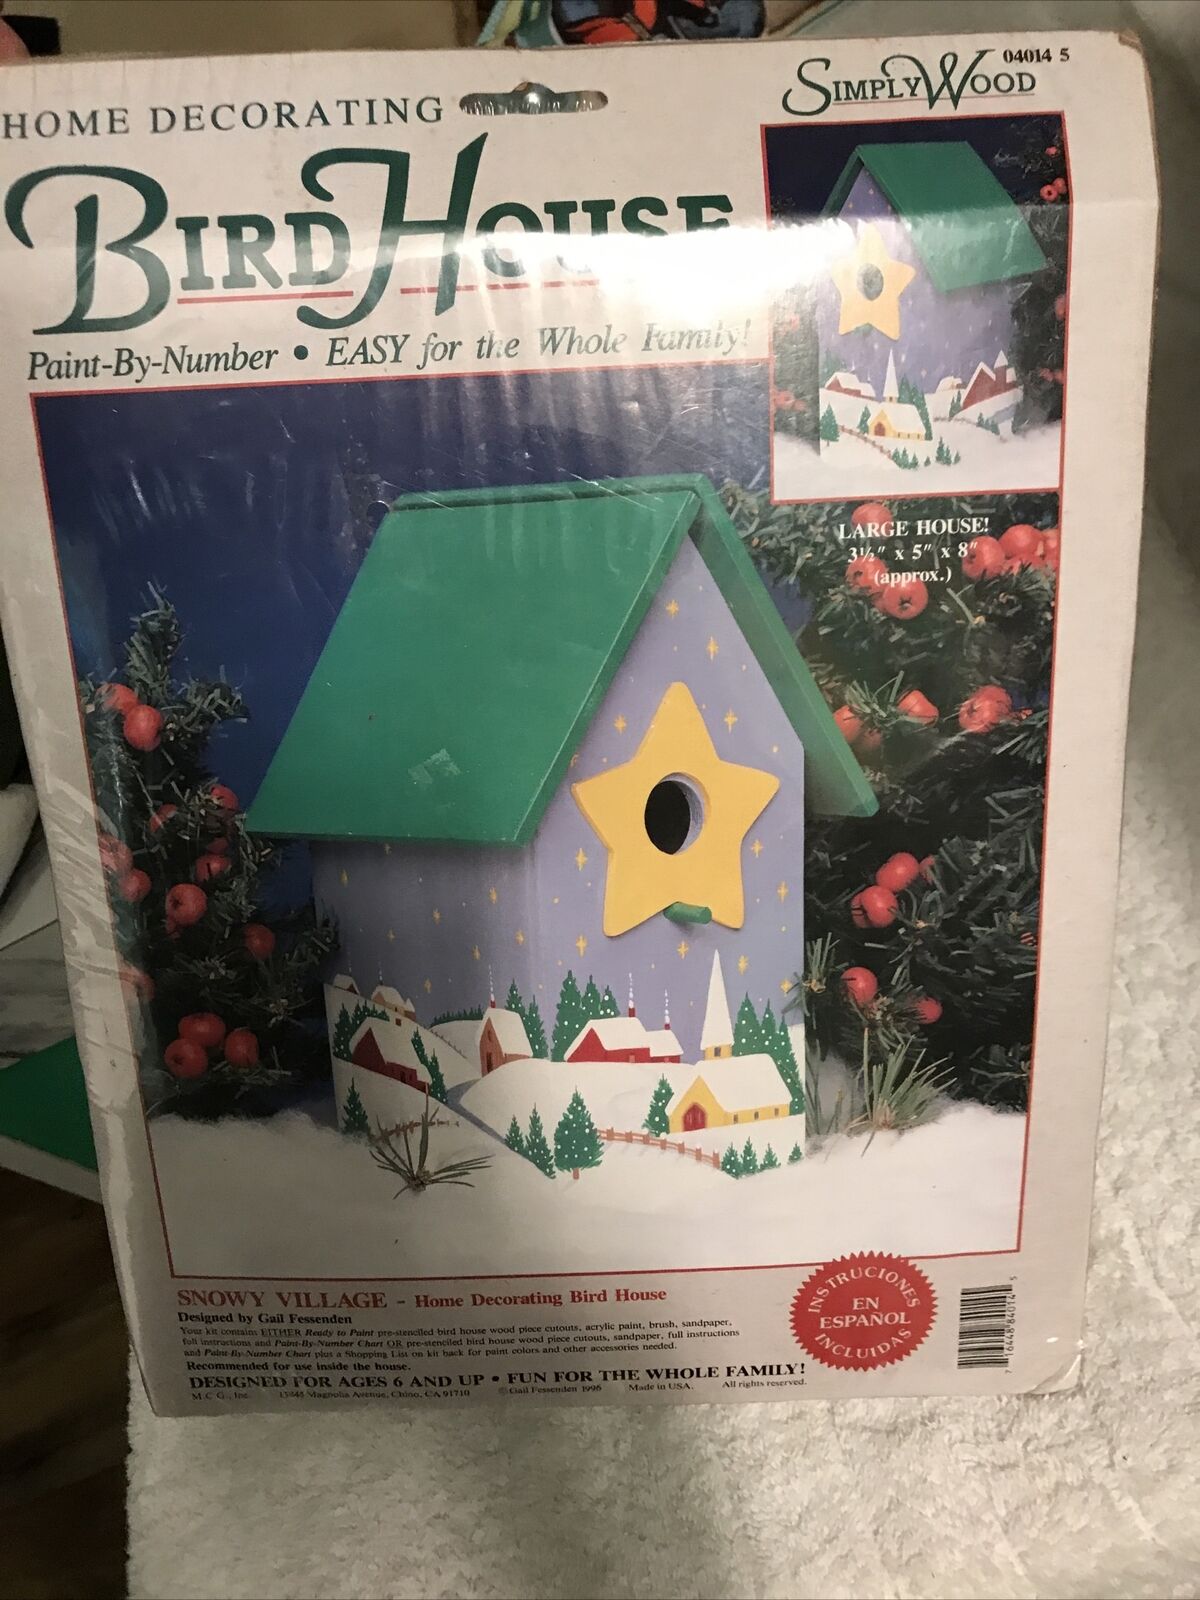 Simply Wood Bird House Kit Paint By Number Snowy Village  Size 3 1/2”×5”×8￼”